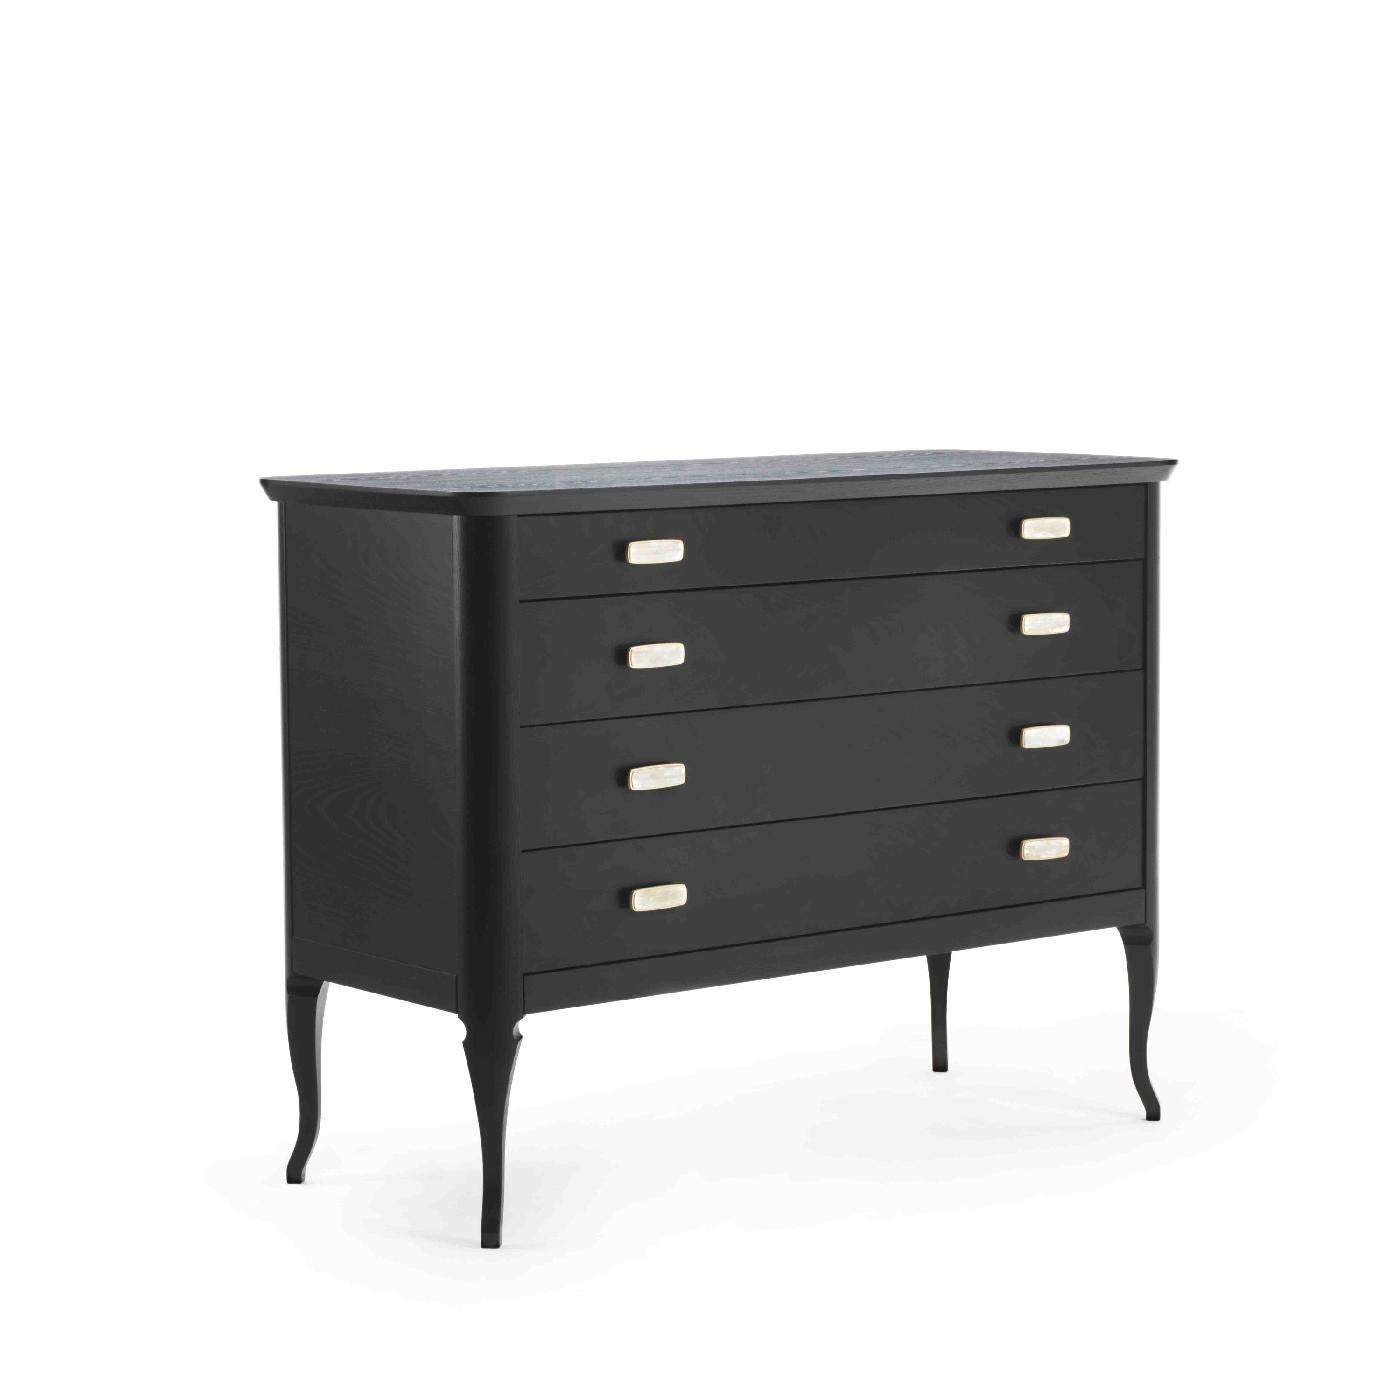 Minimal aesthetic and functional design define this exquisite chest of drawers that will fit perfectly in a modern and classic living room or bedroom. Supported by an ash-veneered wooden frame with an ebonized finish, this dresser has rounded sides